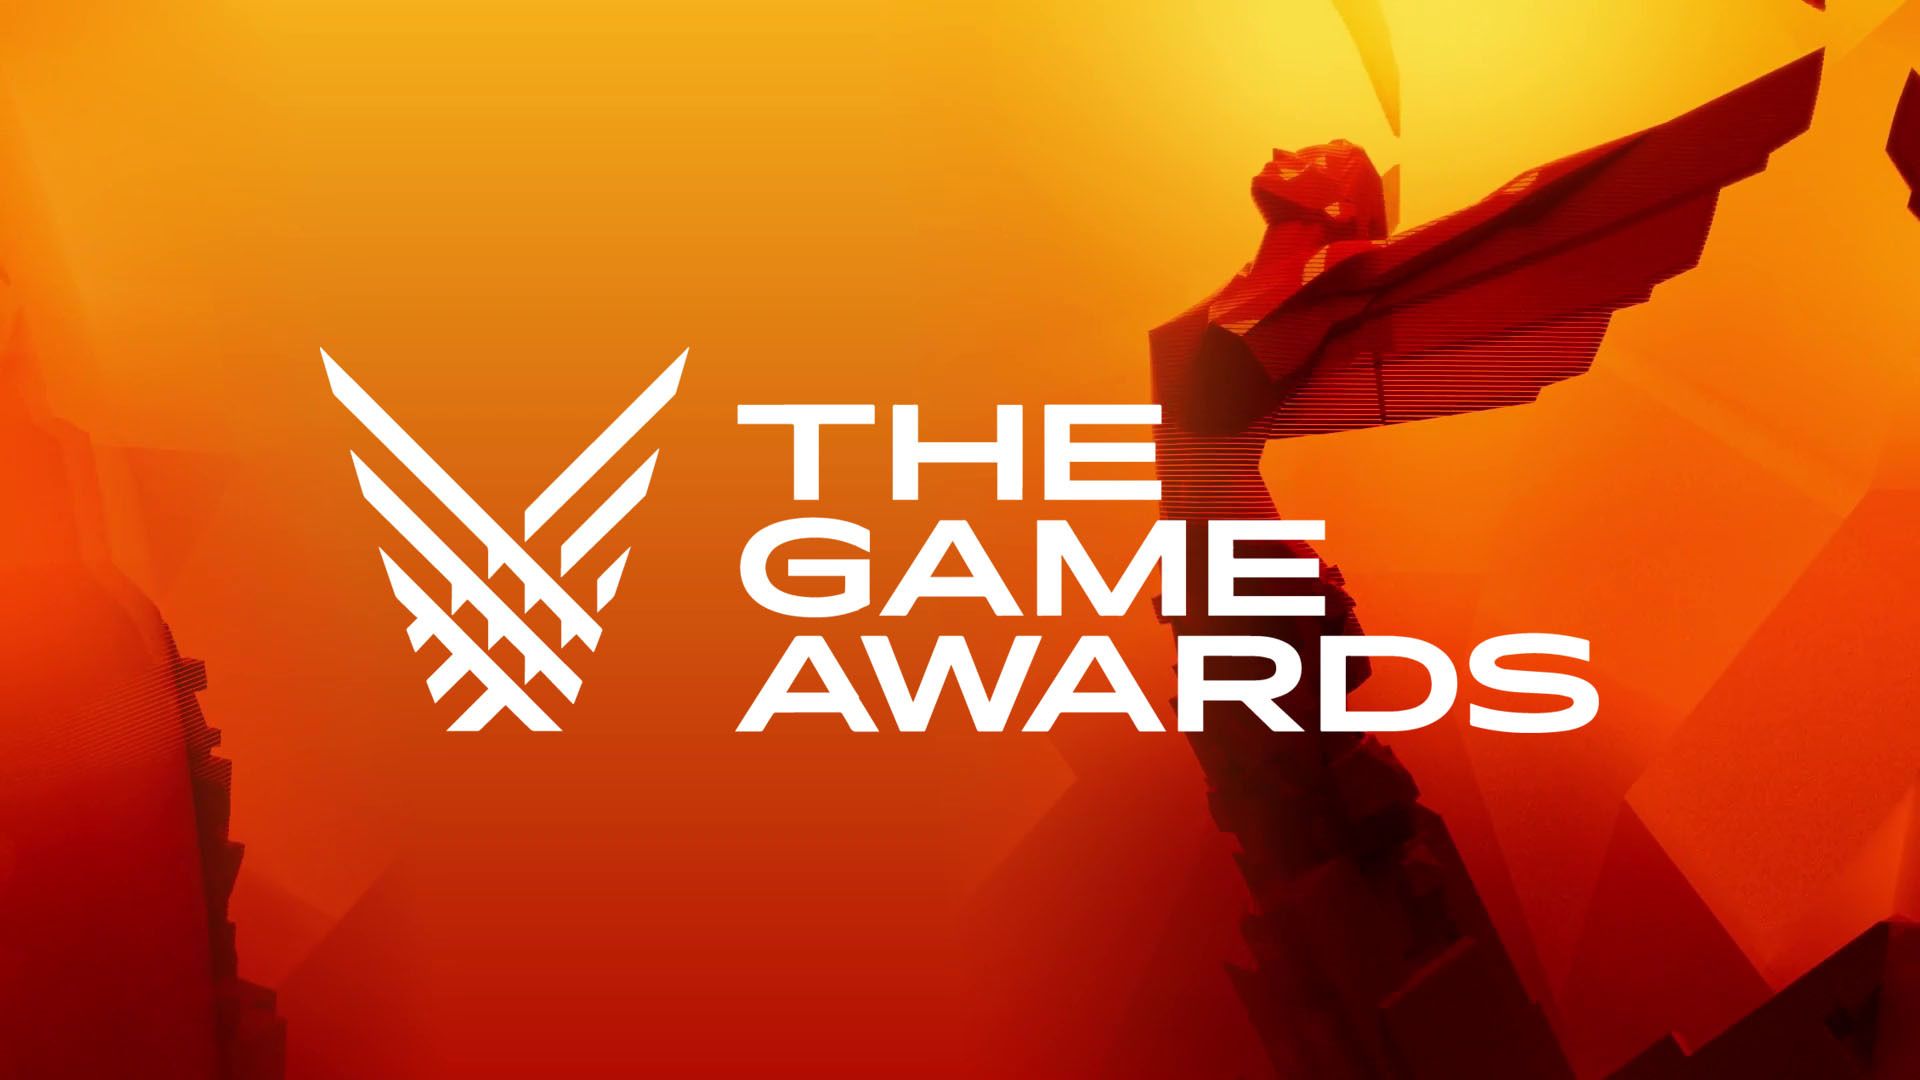 We don't have to be polite about The Game Awards or pretend it actually  cares